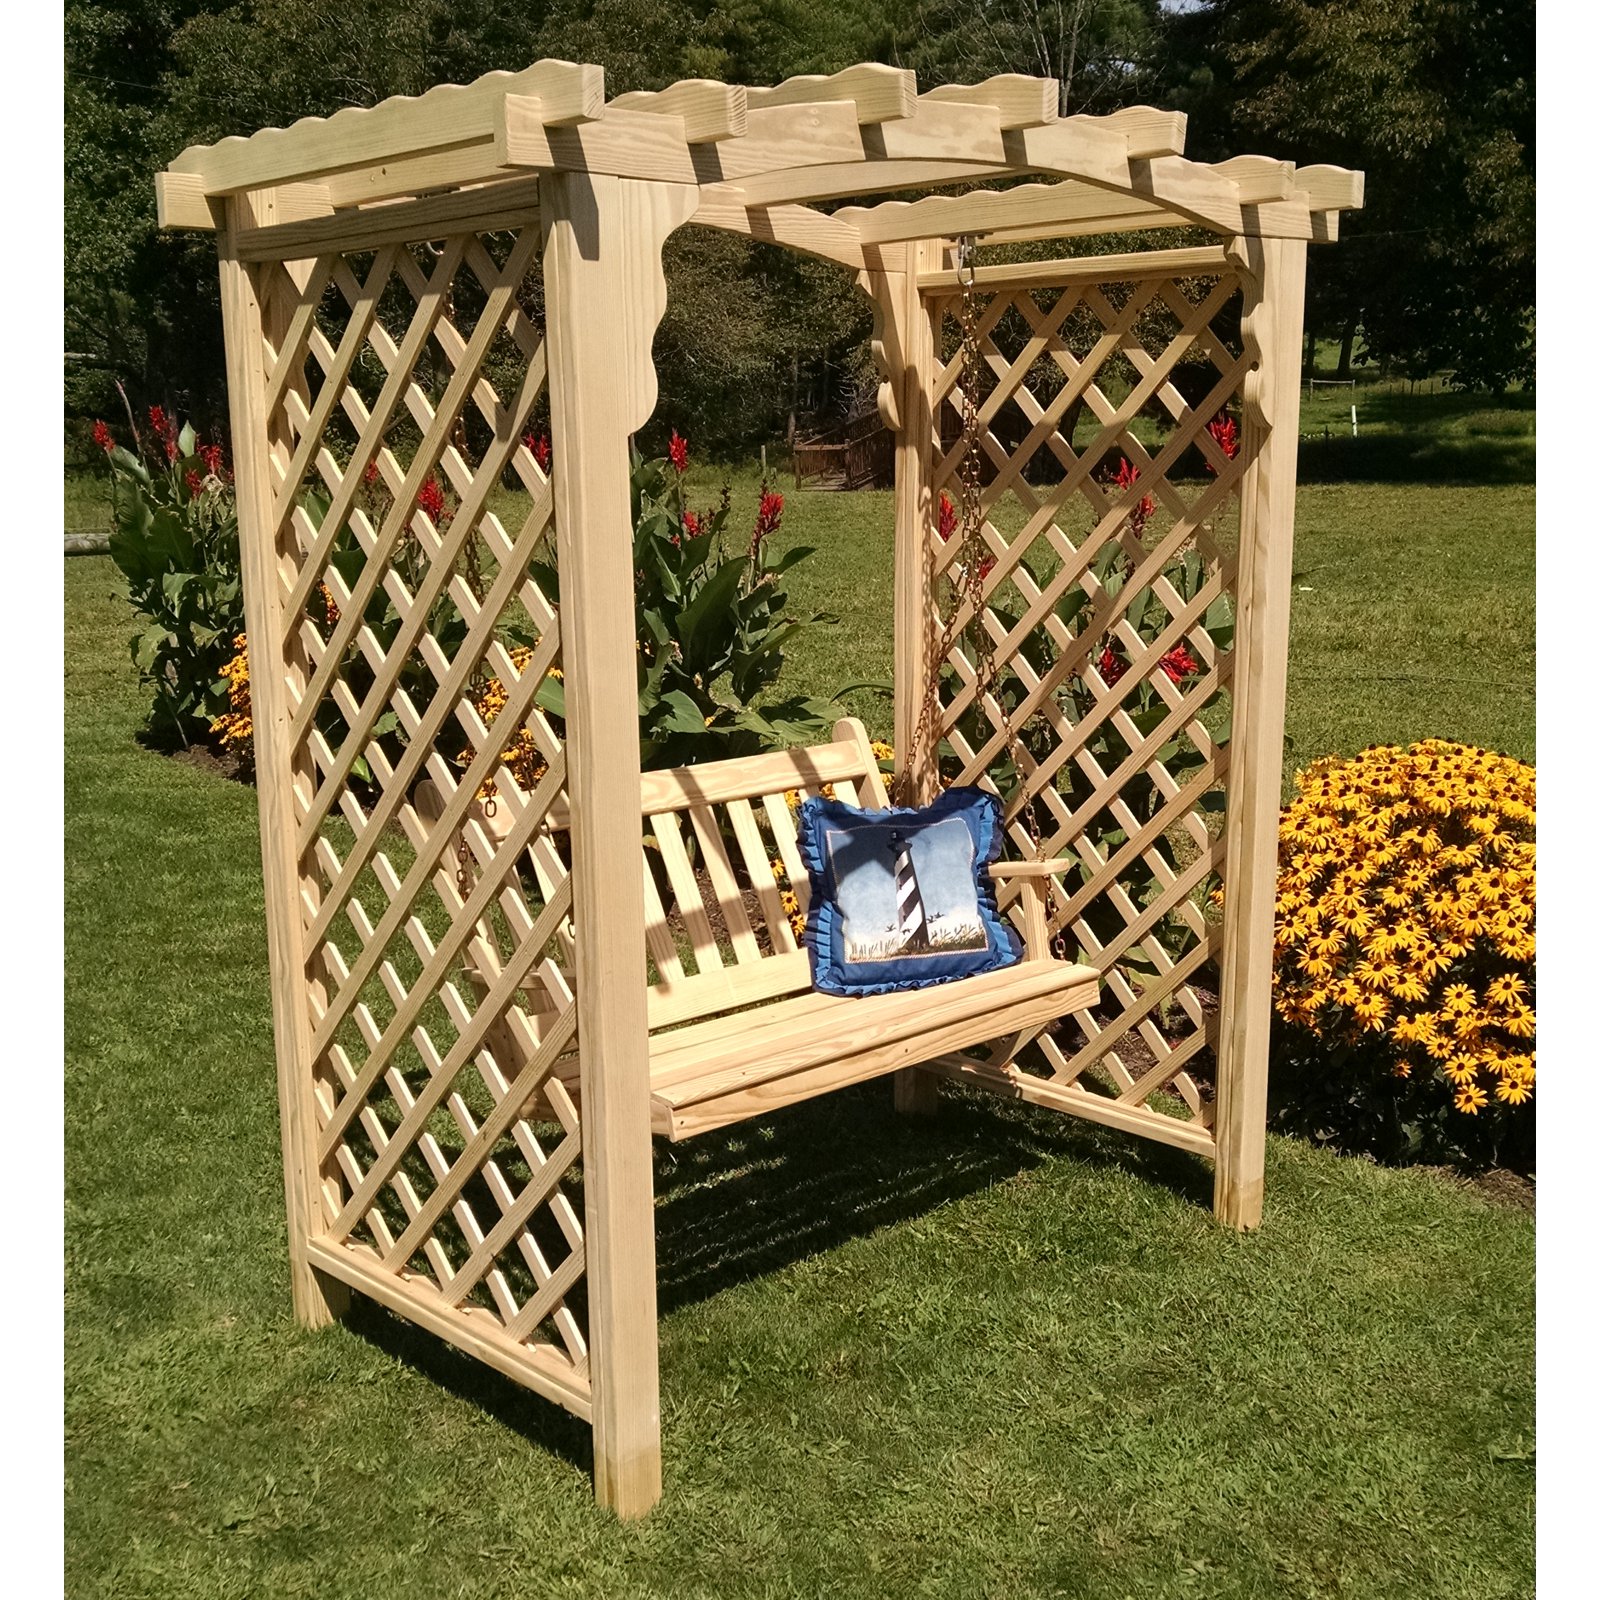 A &amp; L Furniture Jamesport 7 ft. High Cedar Arbor with Swing - image 2 of 2